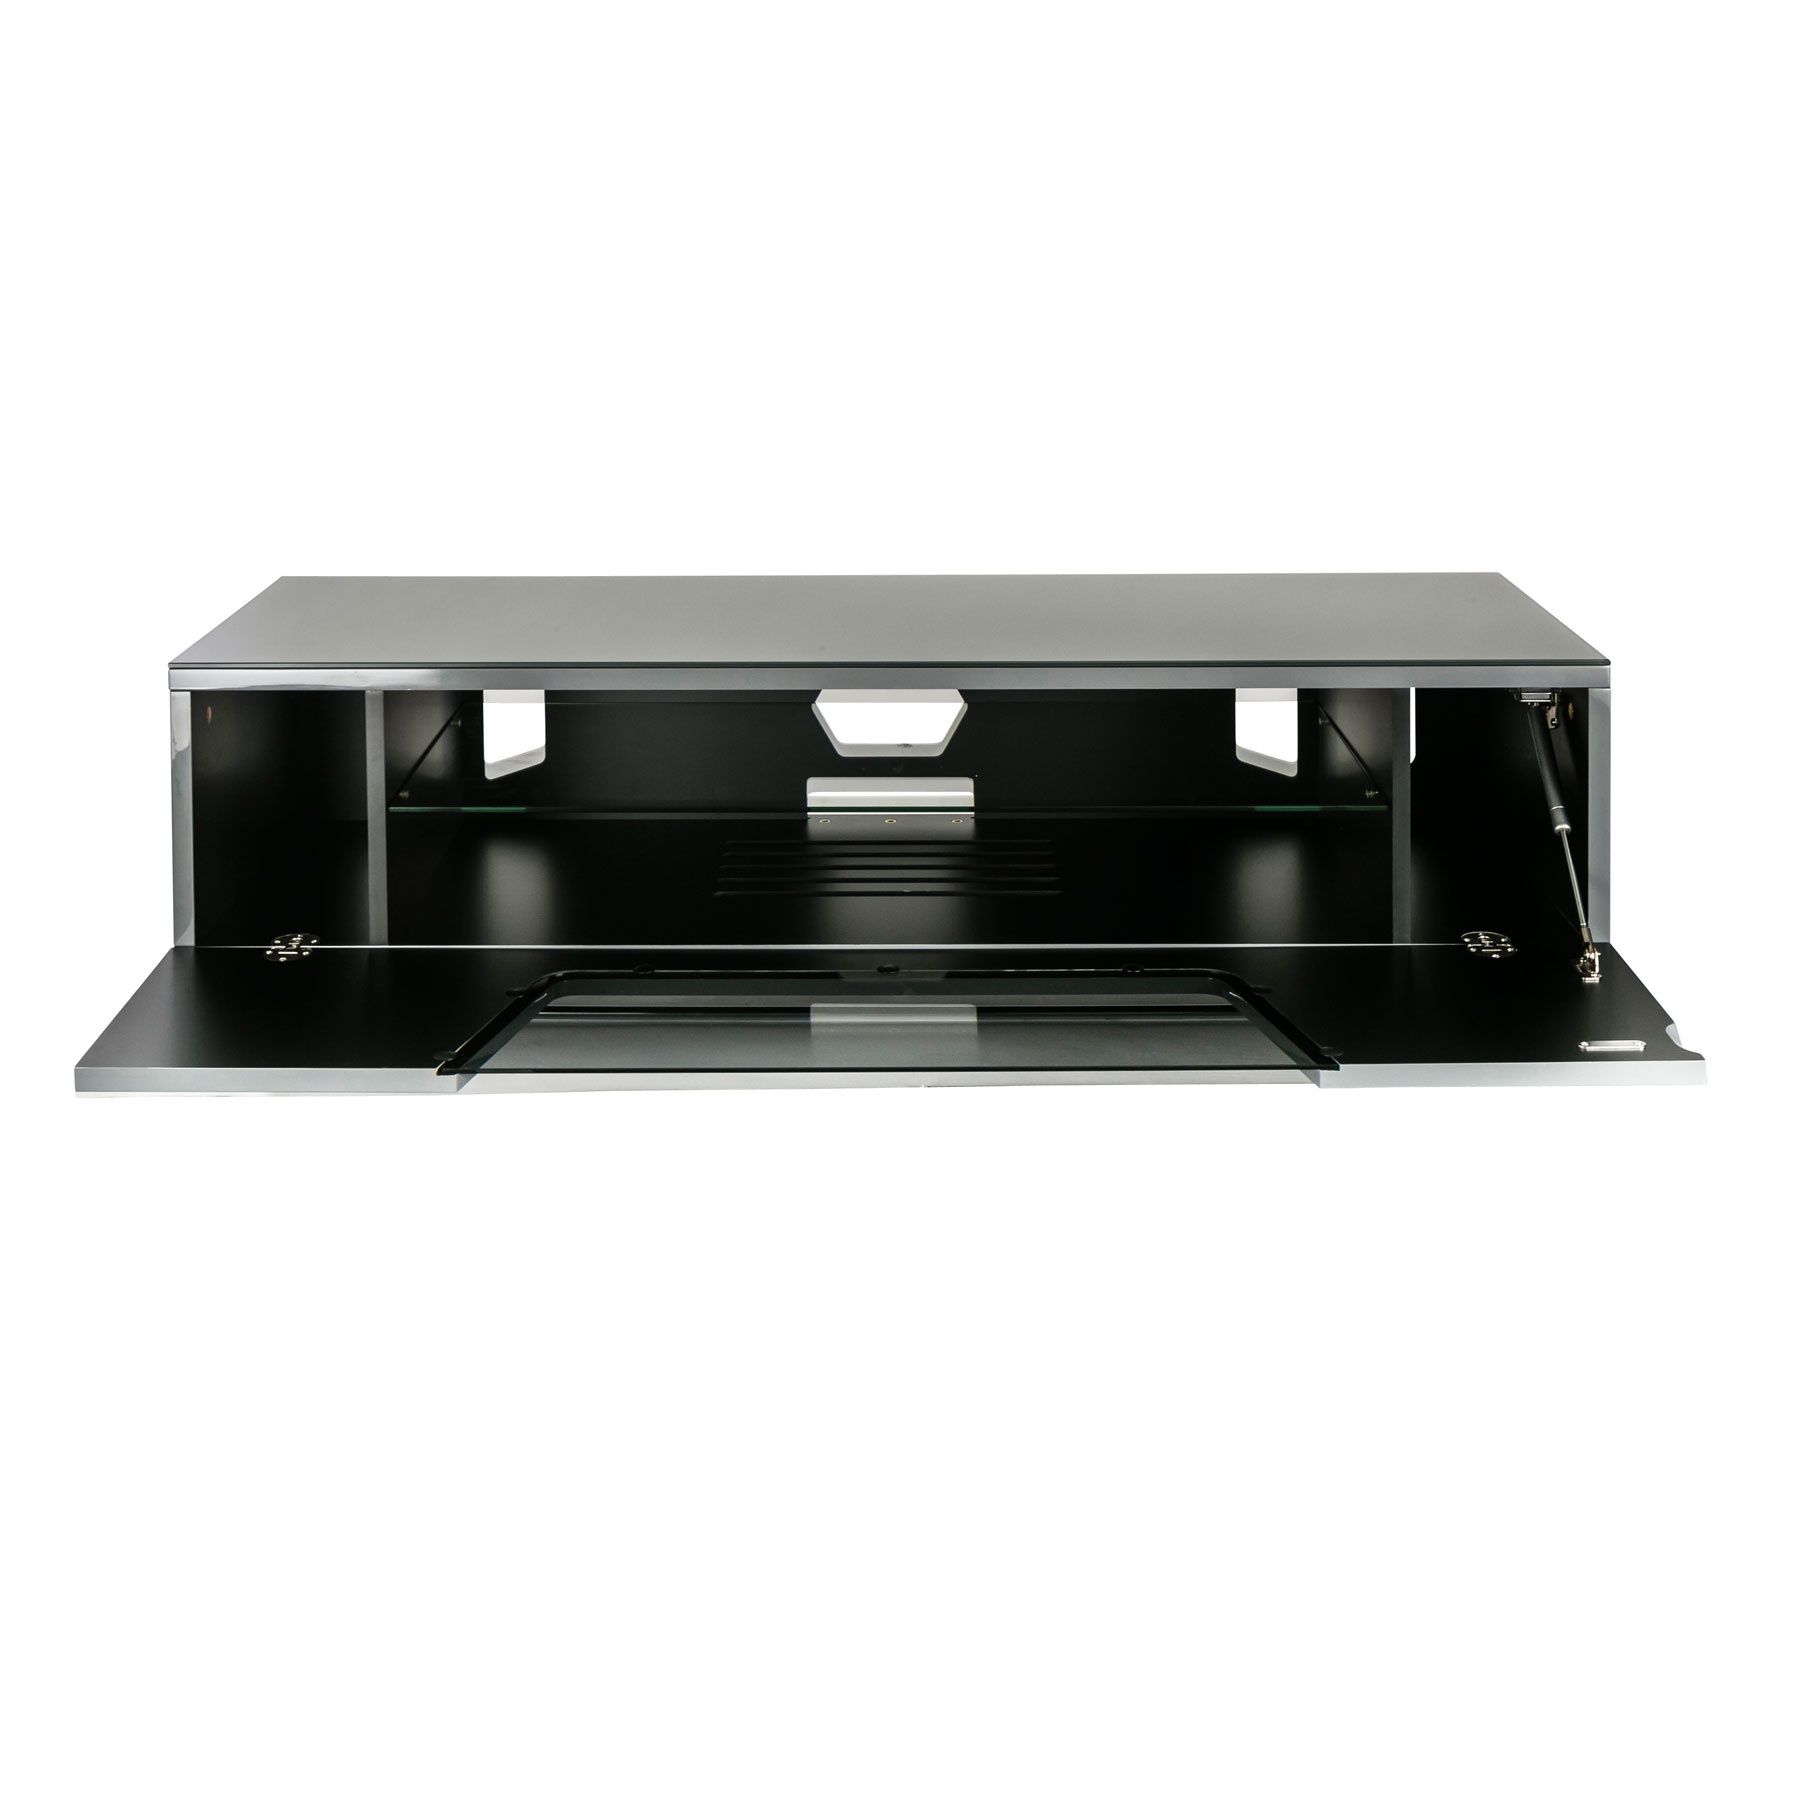 Alphason Chromium 2 120cm Grey Tv Stand For Up To 60" Tvs Pertaining To Chromium Tv Stands (View 4 of 15)